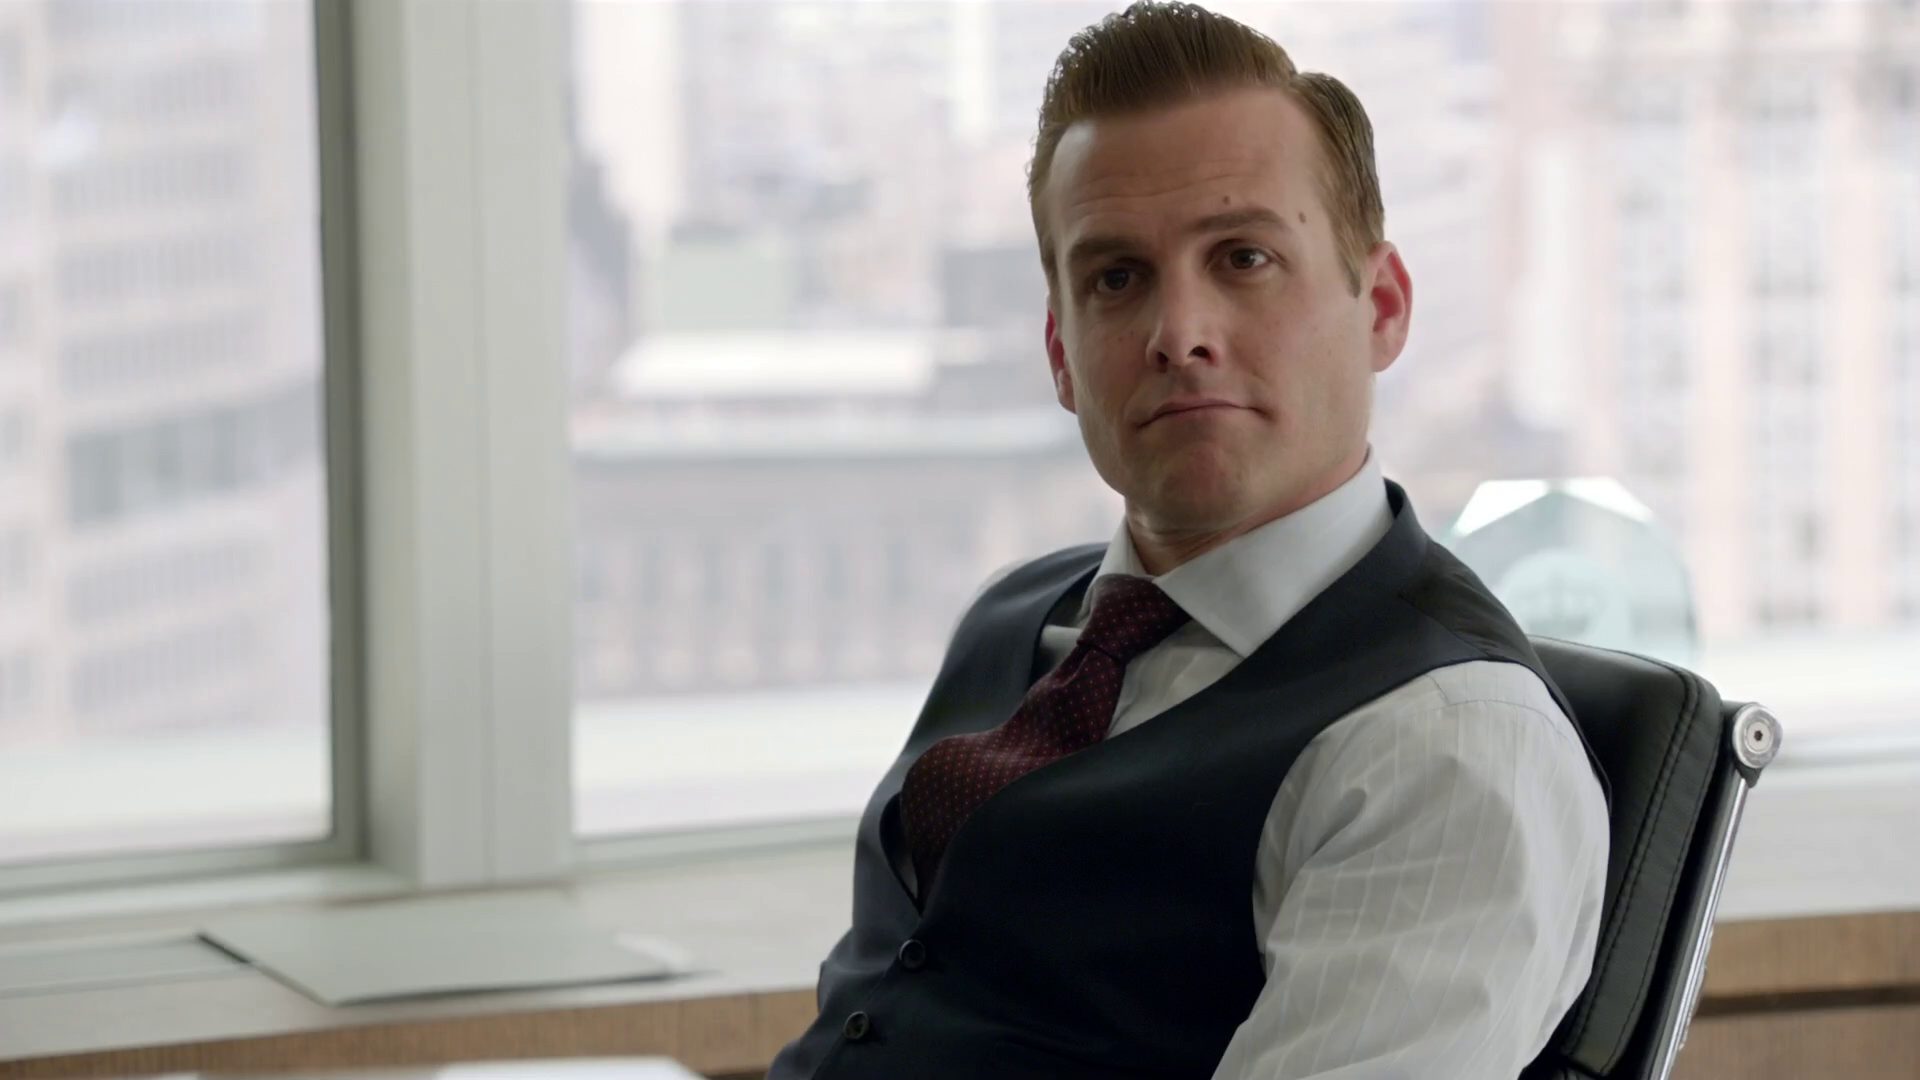 Image - S01E05P039 Harvey.png | Suits Wiki | FANDOM powered by Wikia